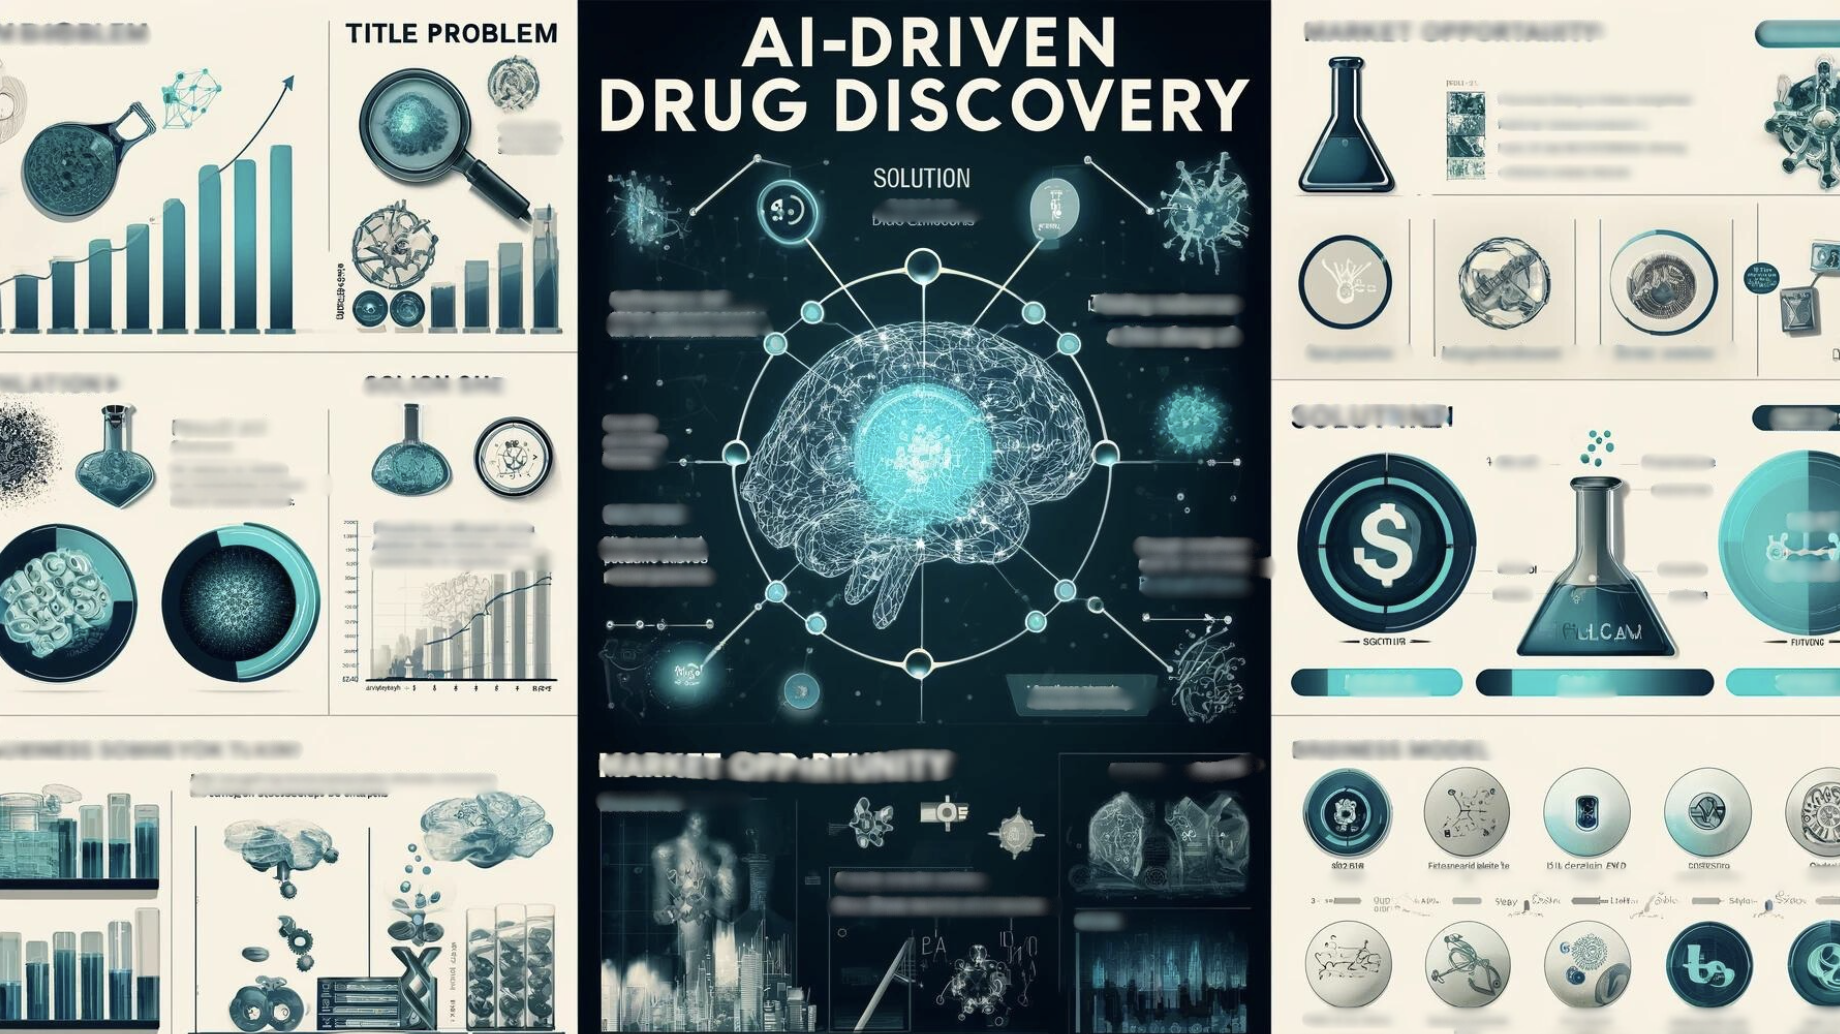 A mock up of the actual deck for the AI-Driven Drug Discovery pitch deck